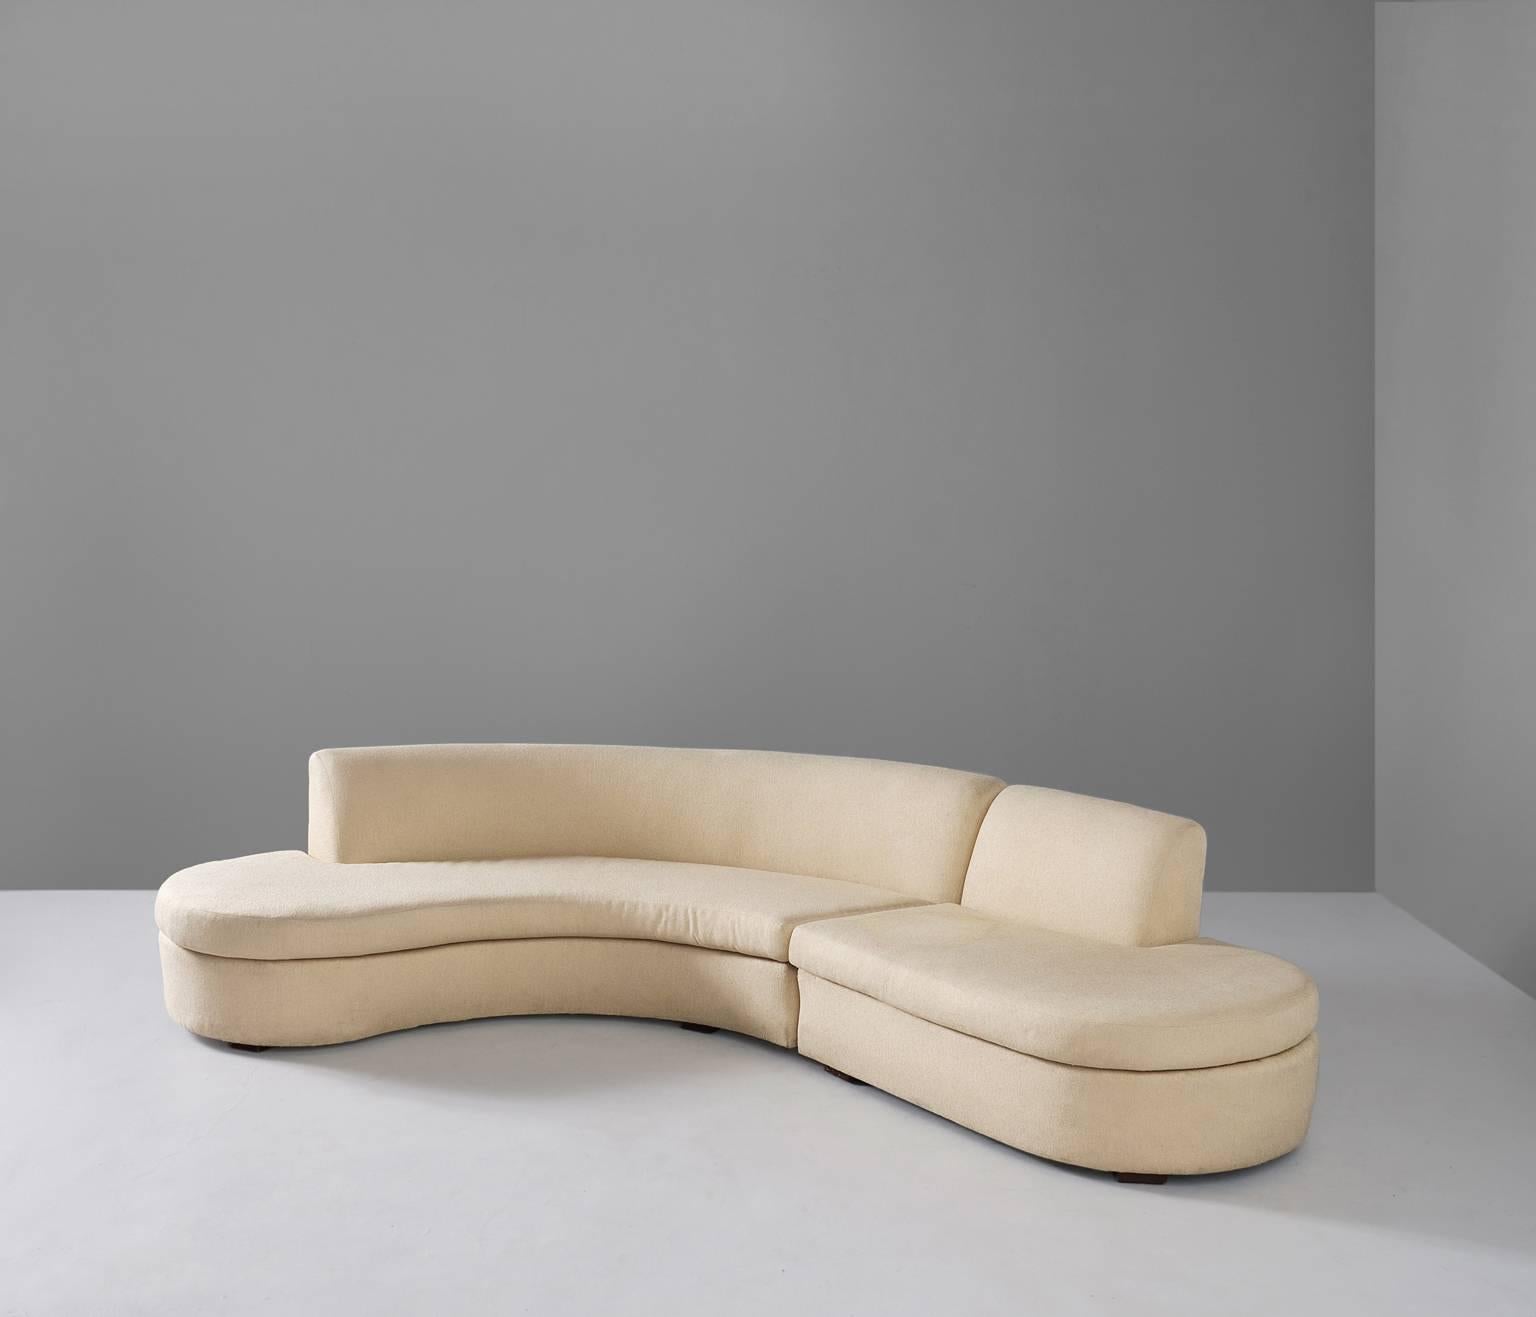 Free-form sofa, fabric, Europe, 1970s.

Organic shaped sectional sofa. The sofa consist of two elements. The backrest nicely follows the curve of the seating. This serpentine sofa has beautiful round edges. Additional line to the seating to create